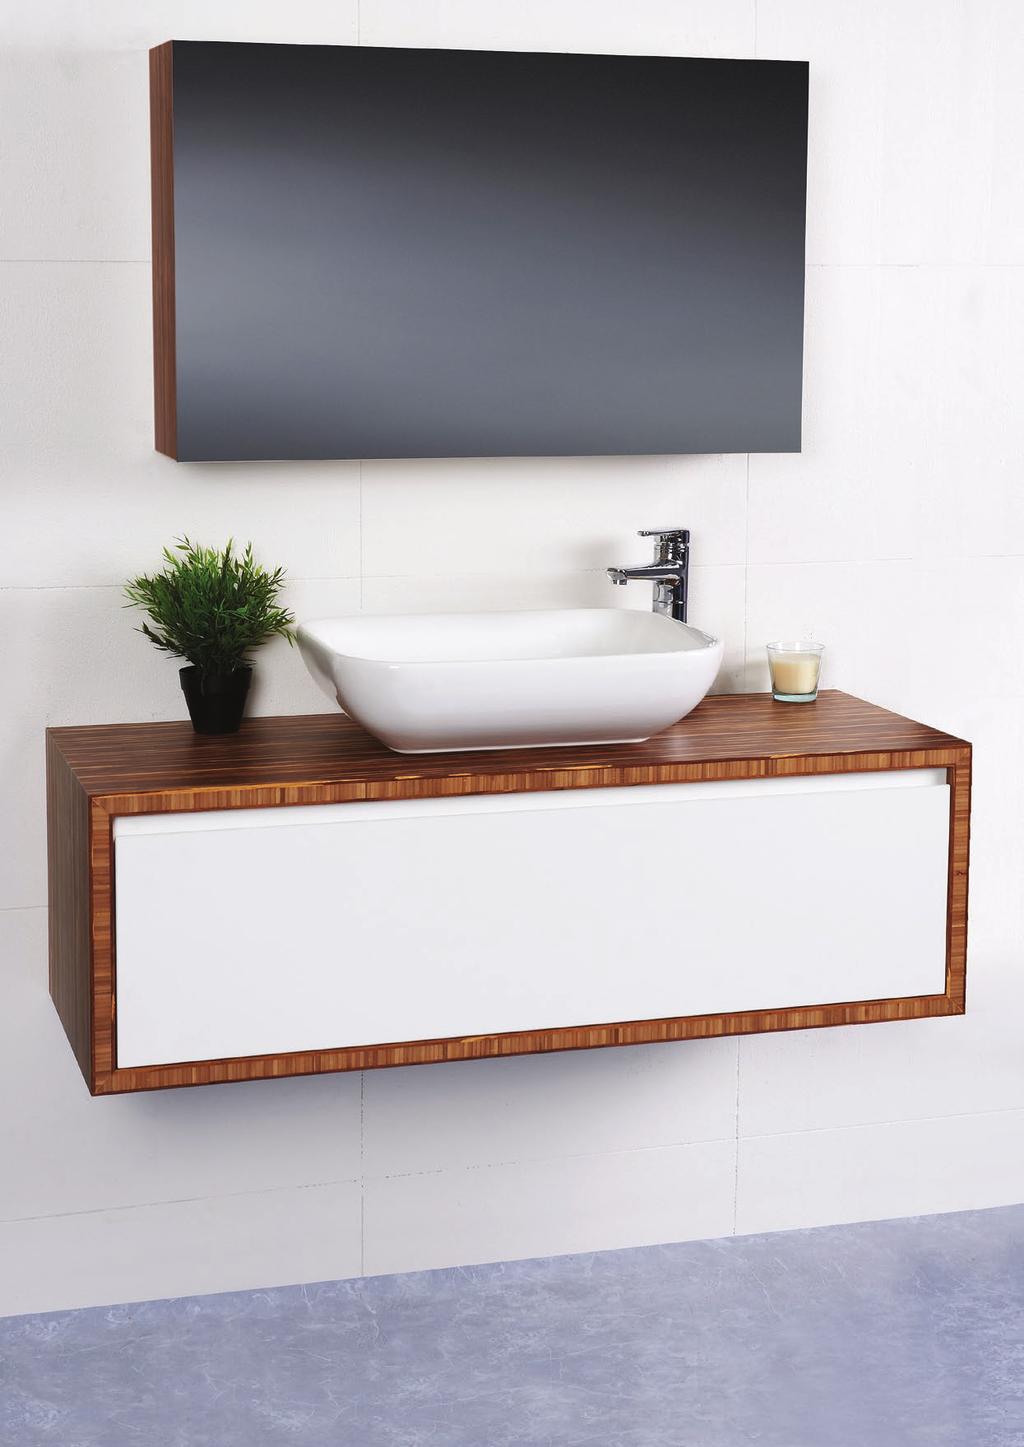 Mode Vanities are distributed by RF Bathroom and Kitchen Products Pty Ltd. All Mode vanity cabinets are proudly Australian Made.